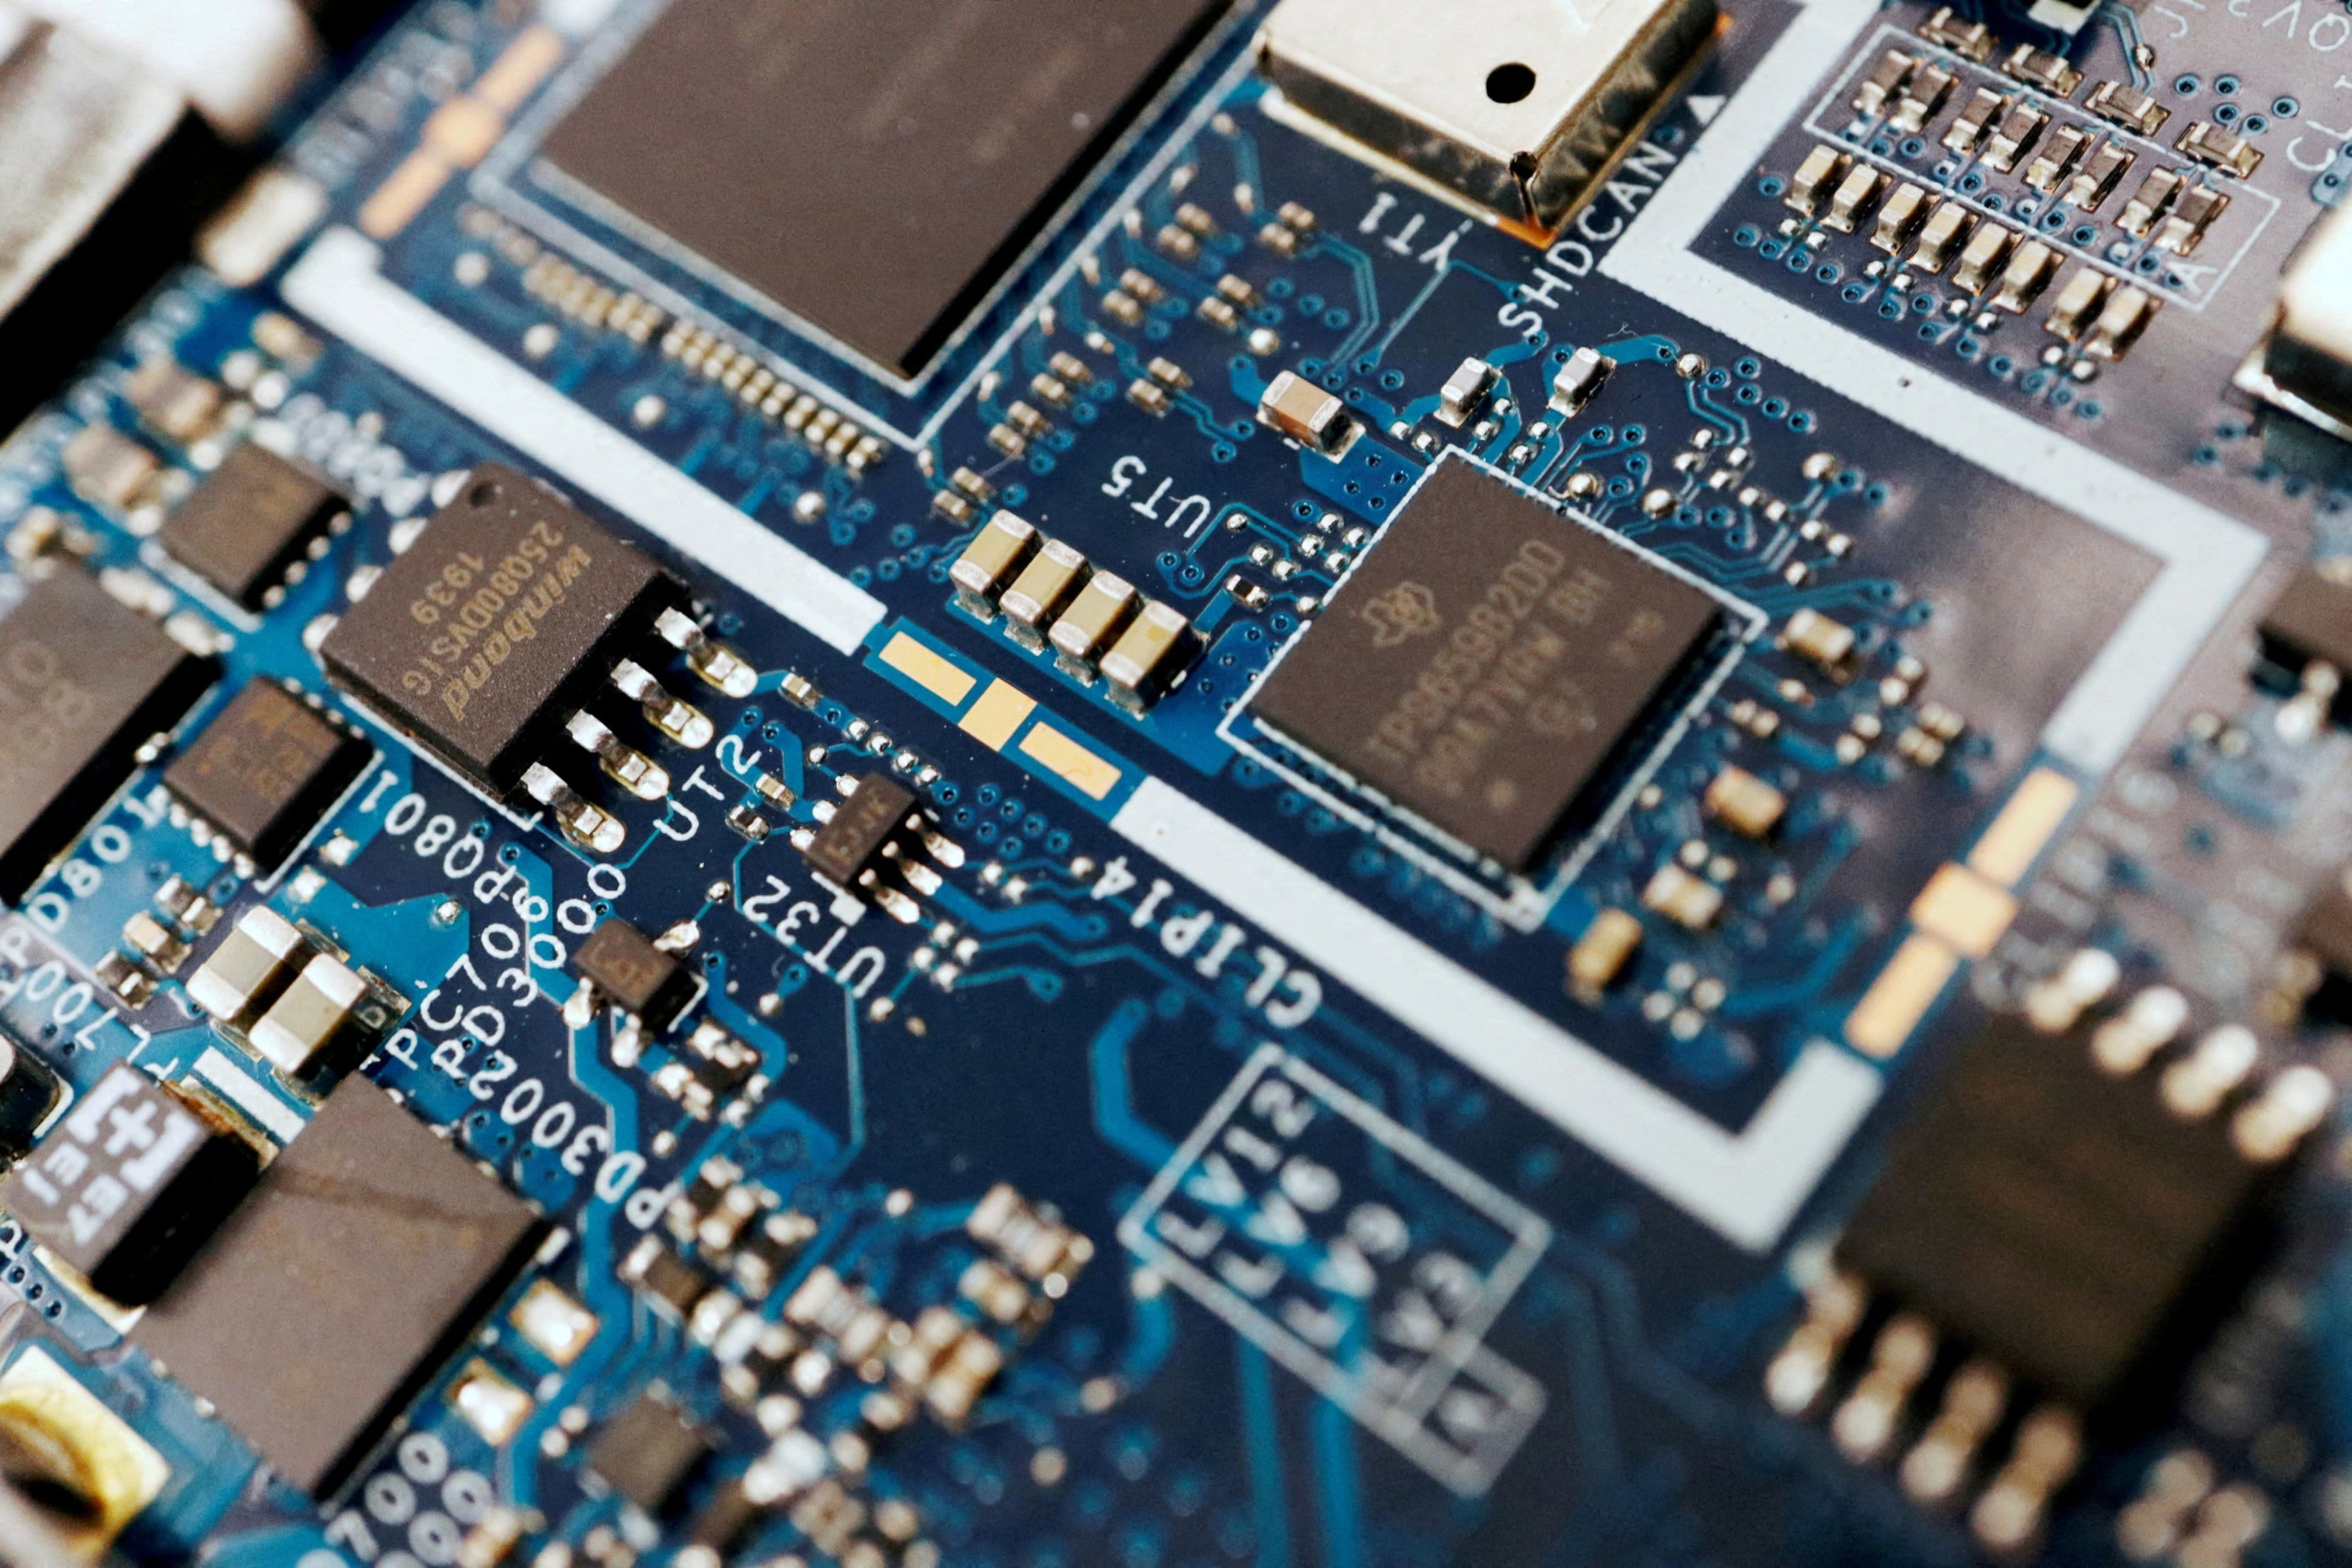 Samsung and ASML are investing $760 million in a chip manufacturing plant in South Korea